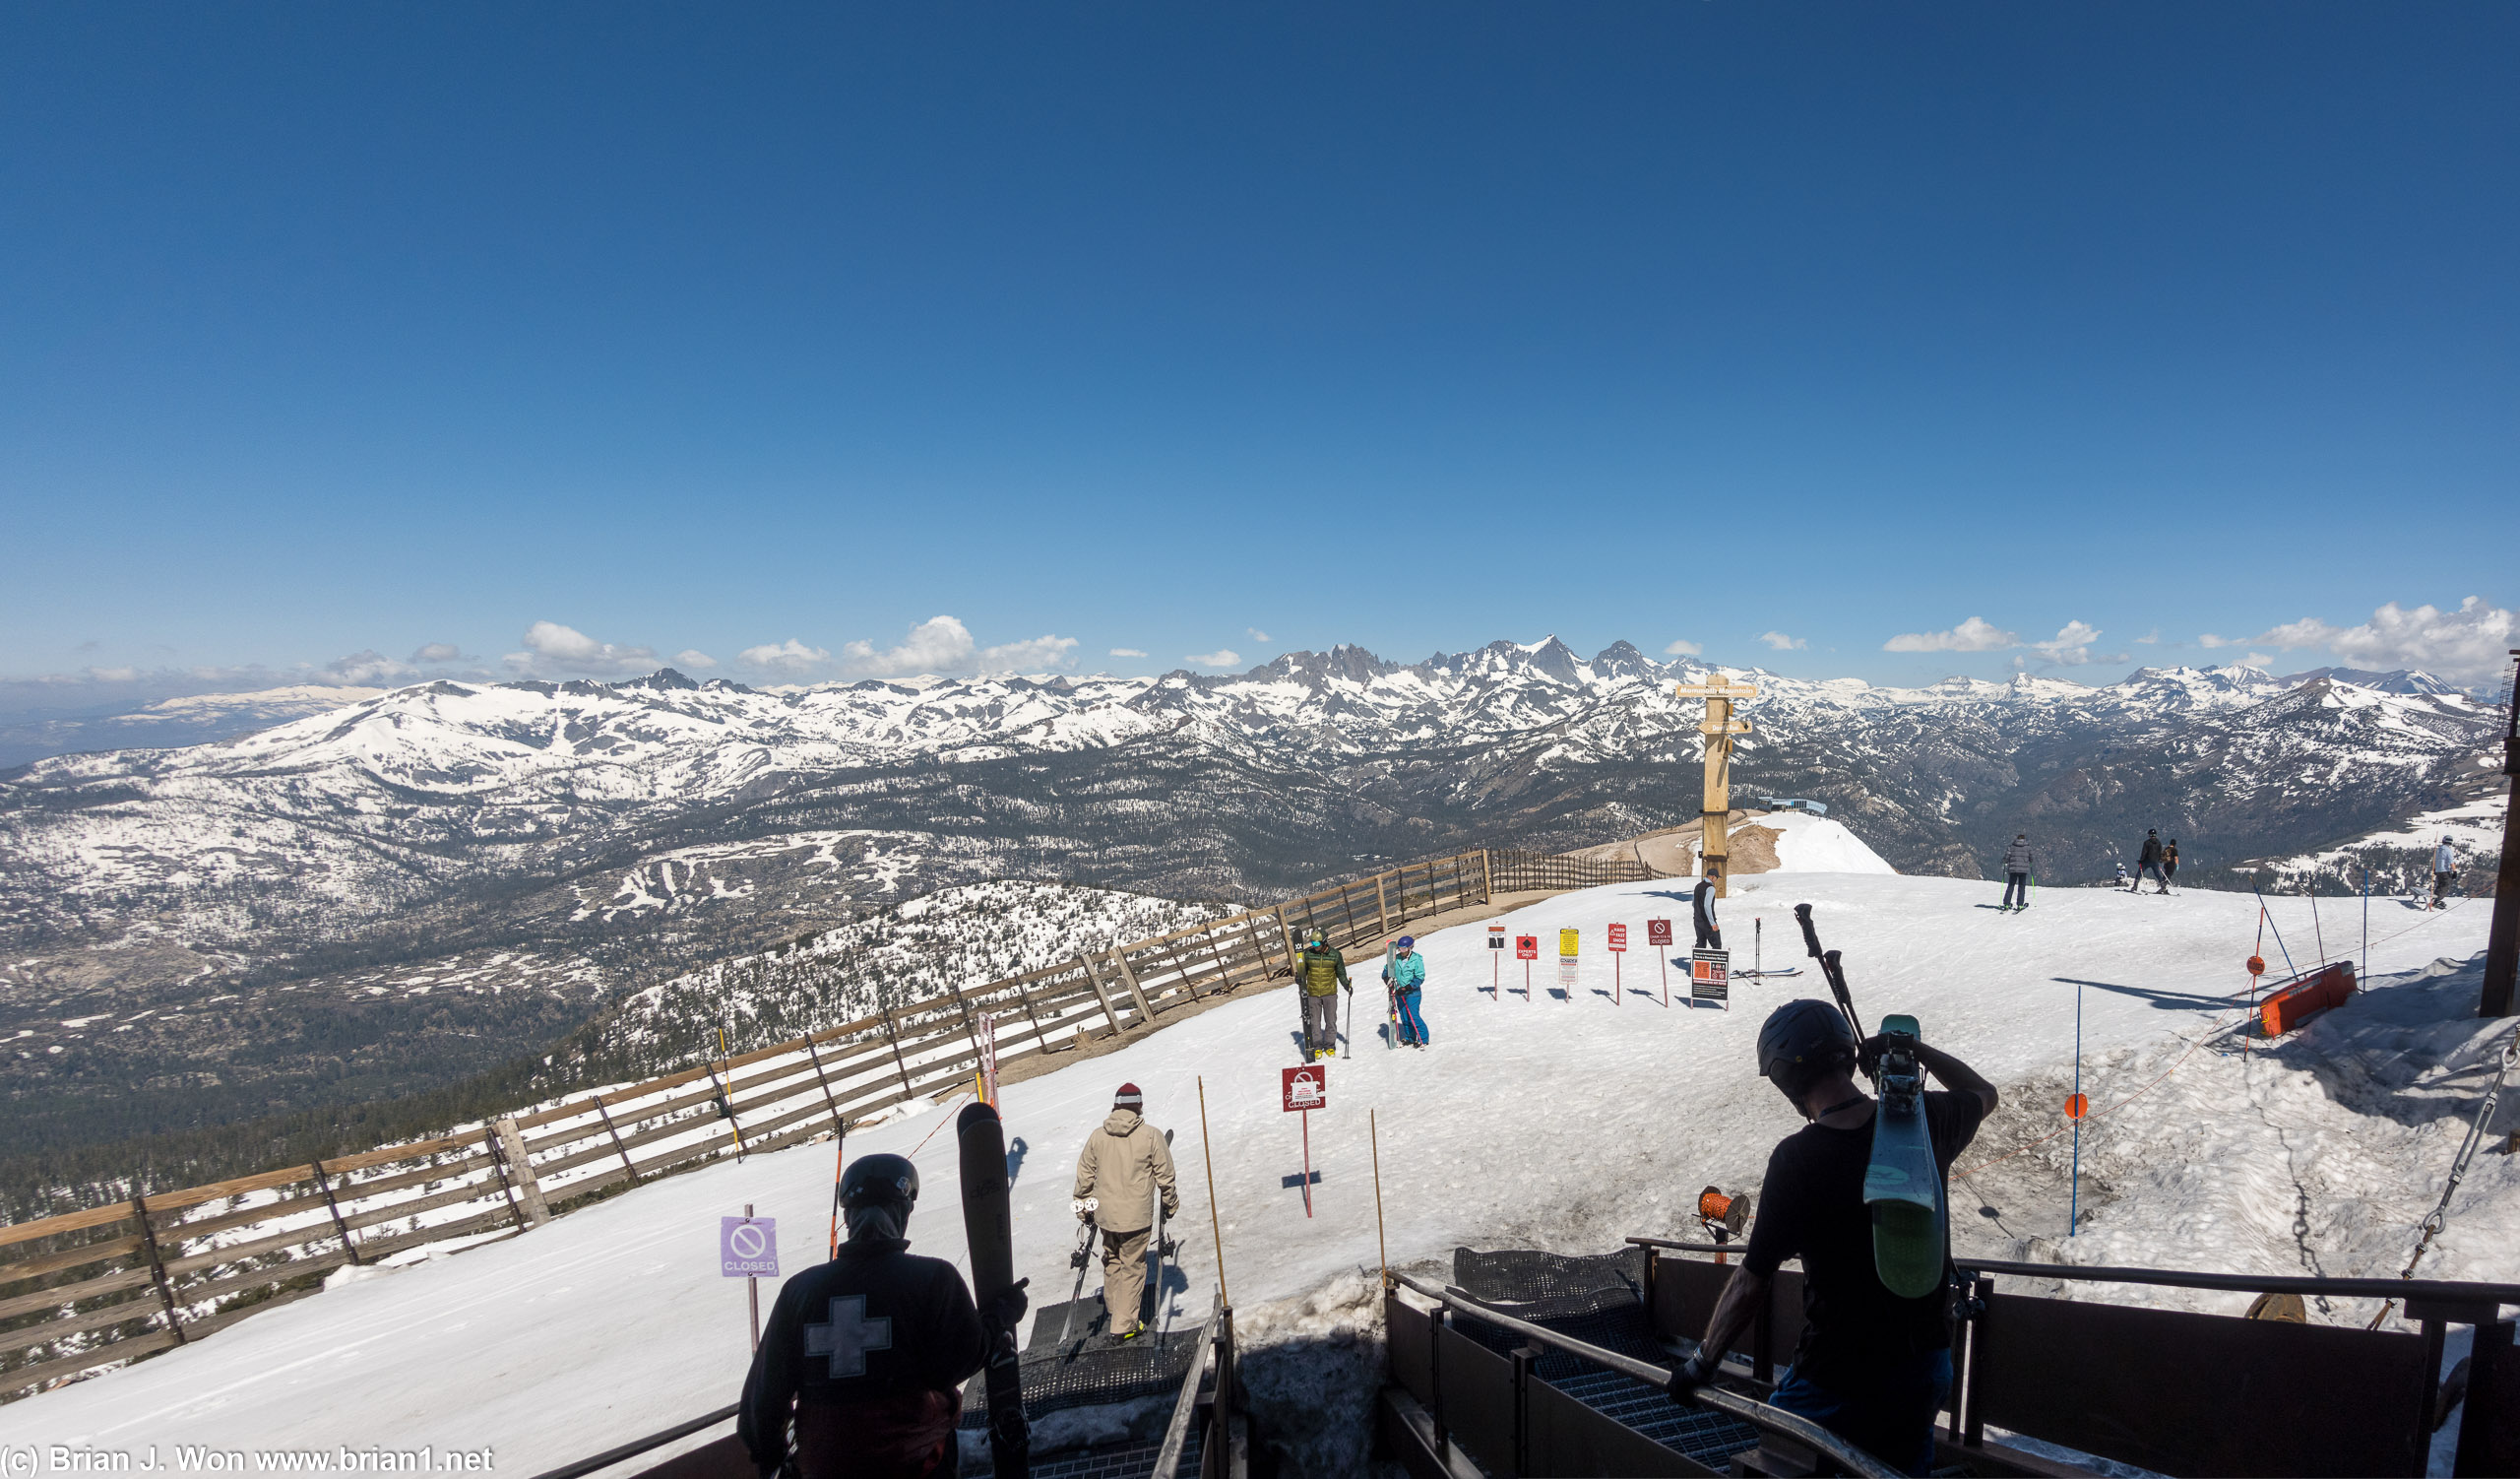 View from the upper gondola building.